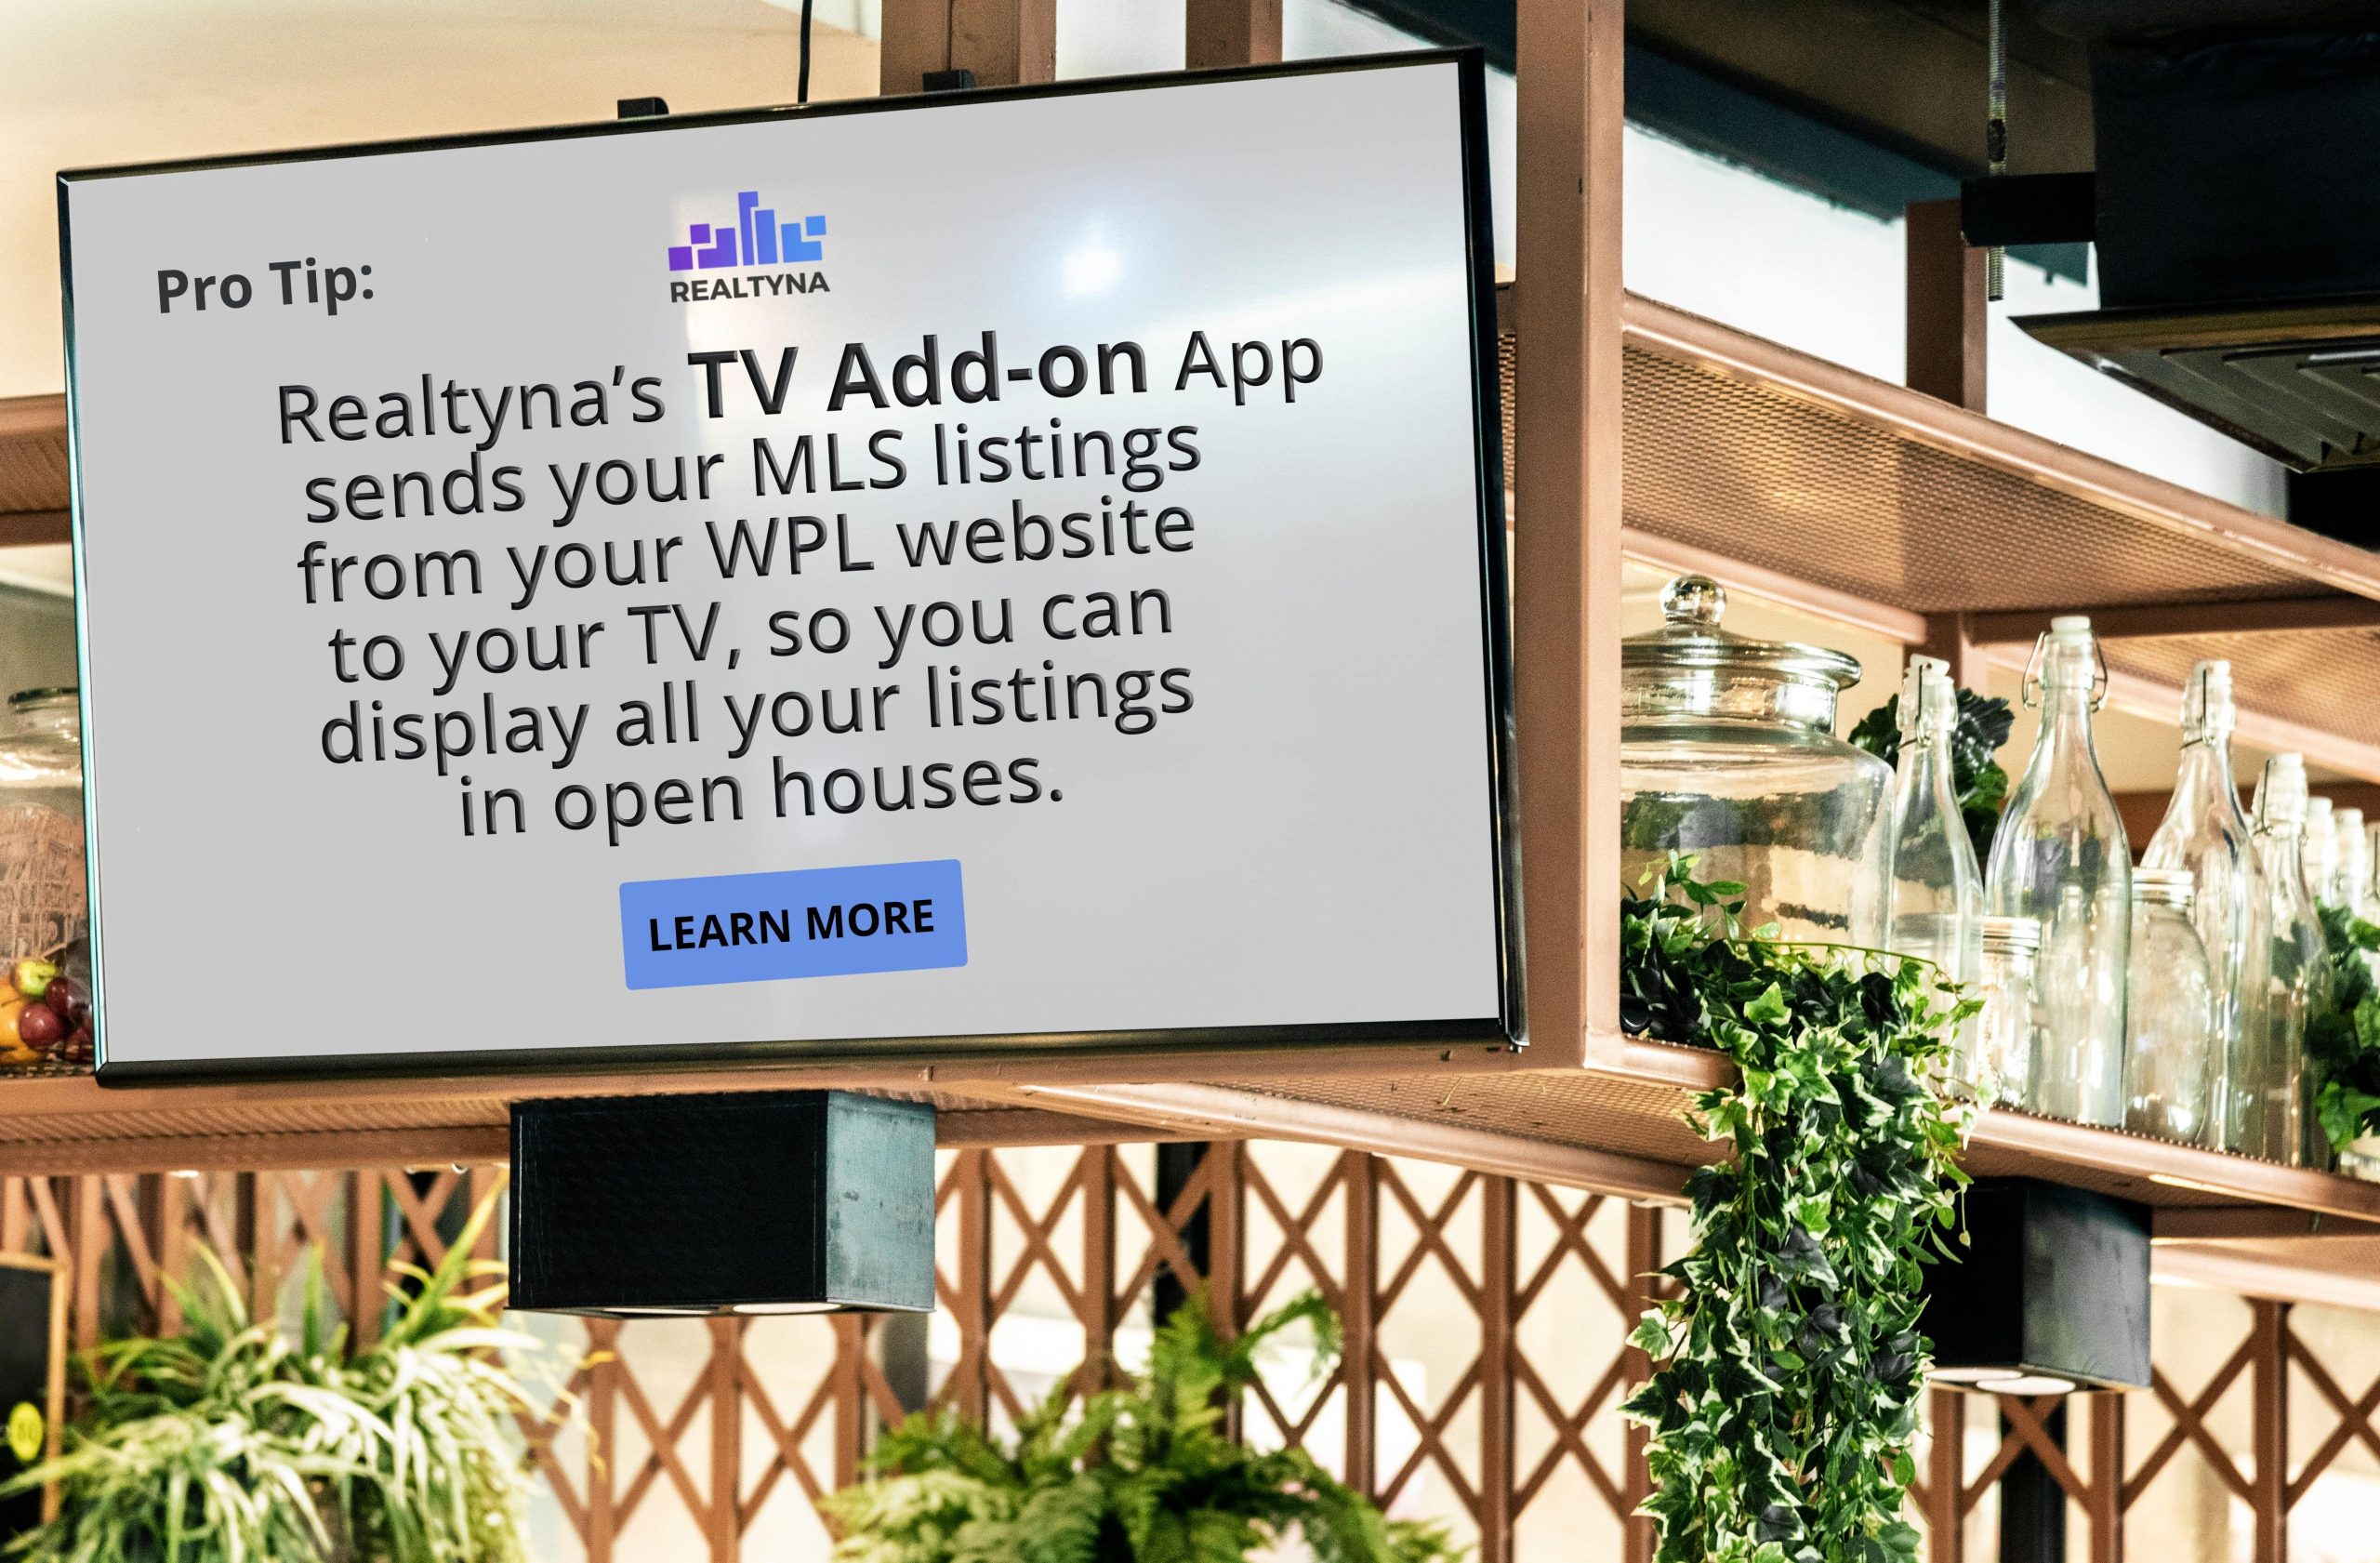 Realtyna's TV Add-on